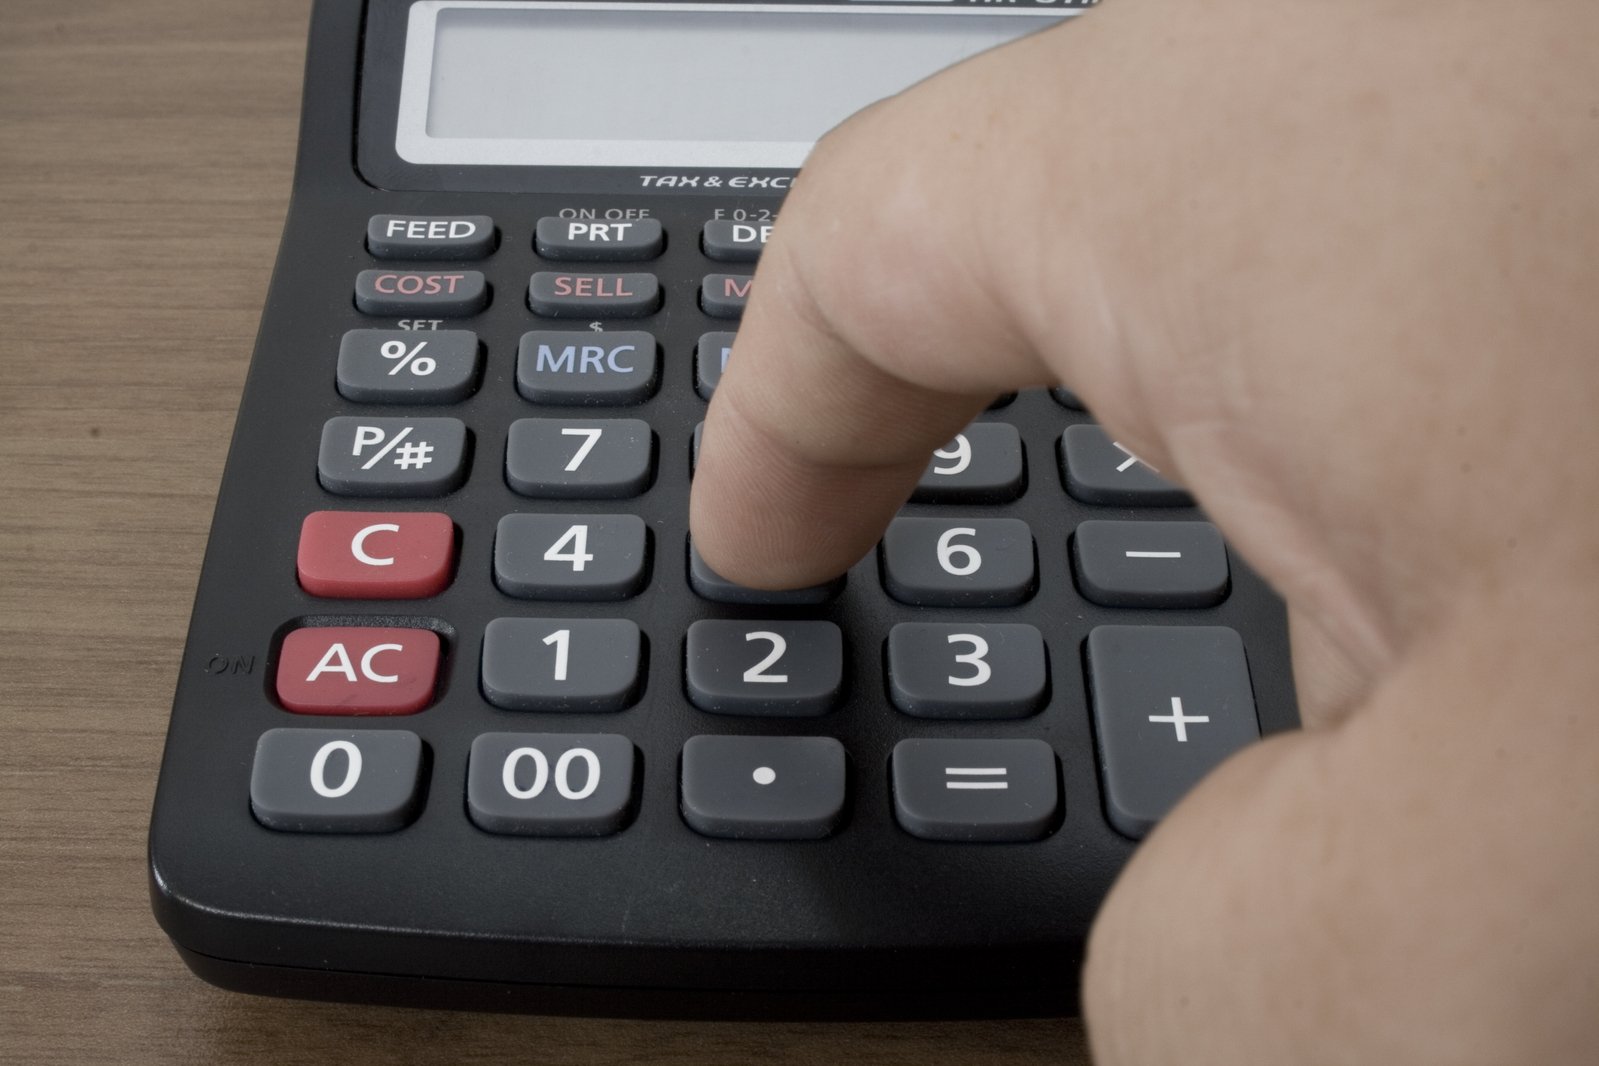 a person presses the numbers on the calculator